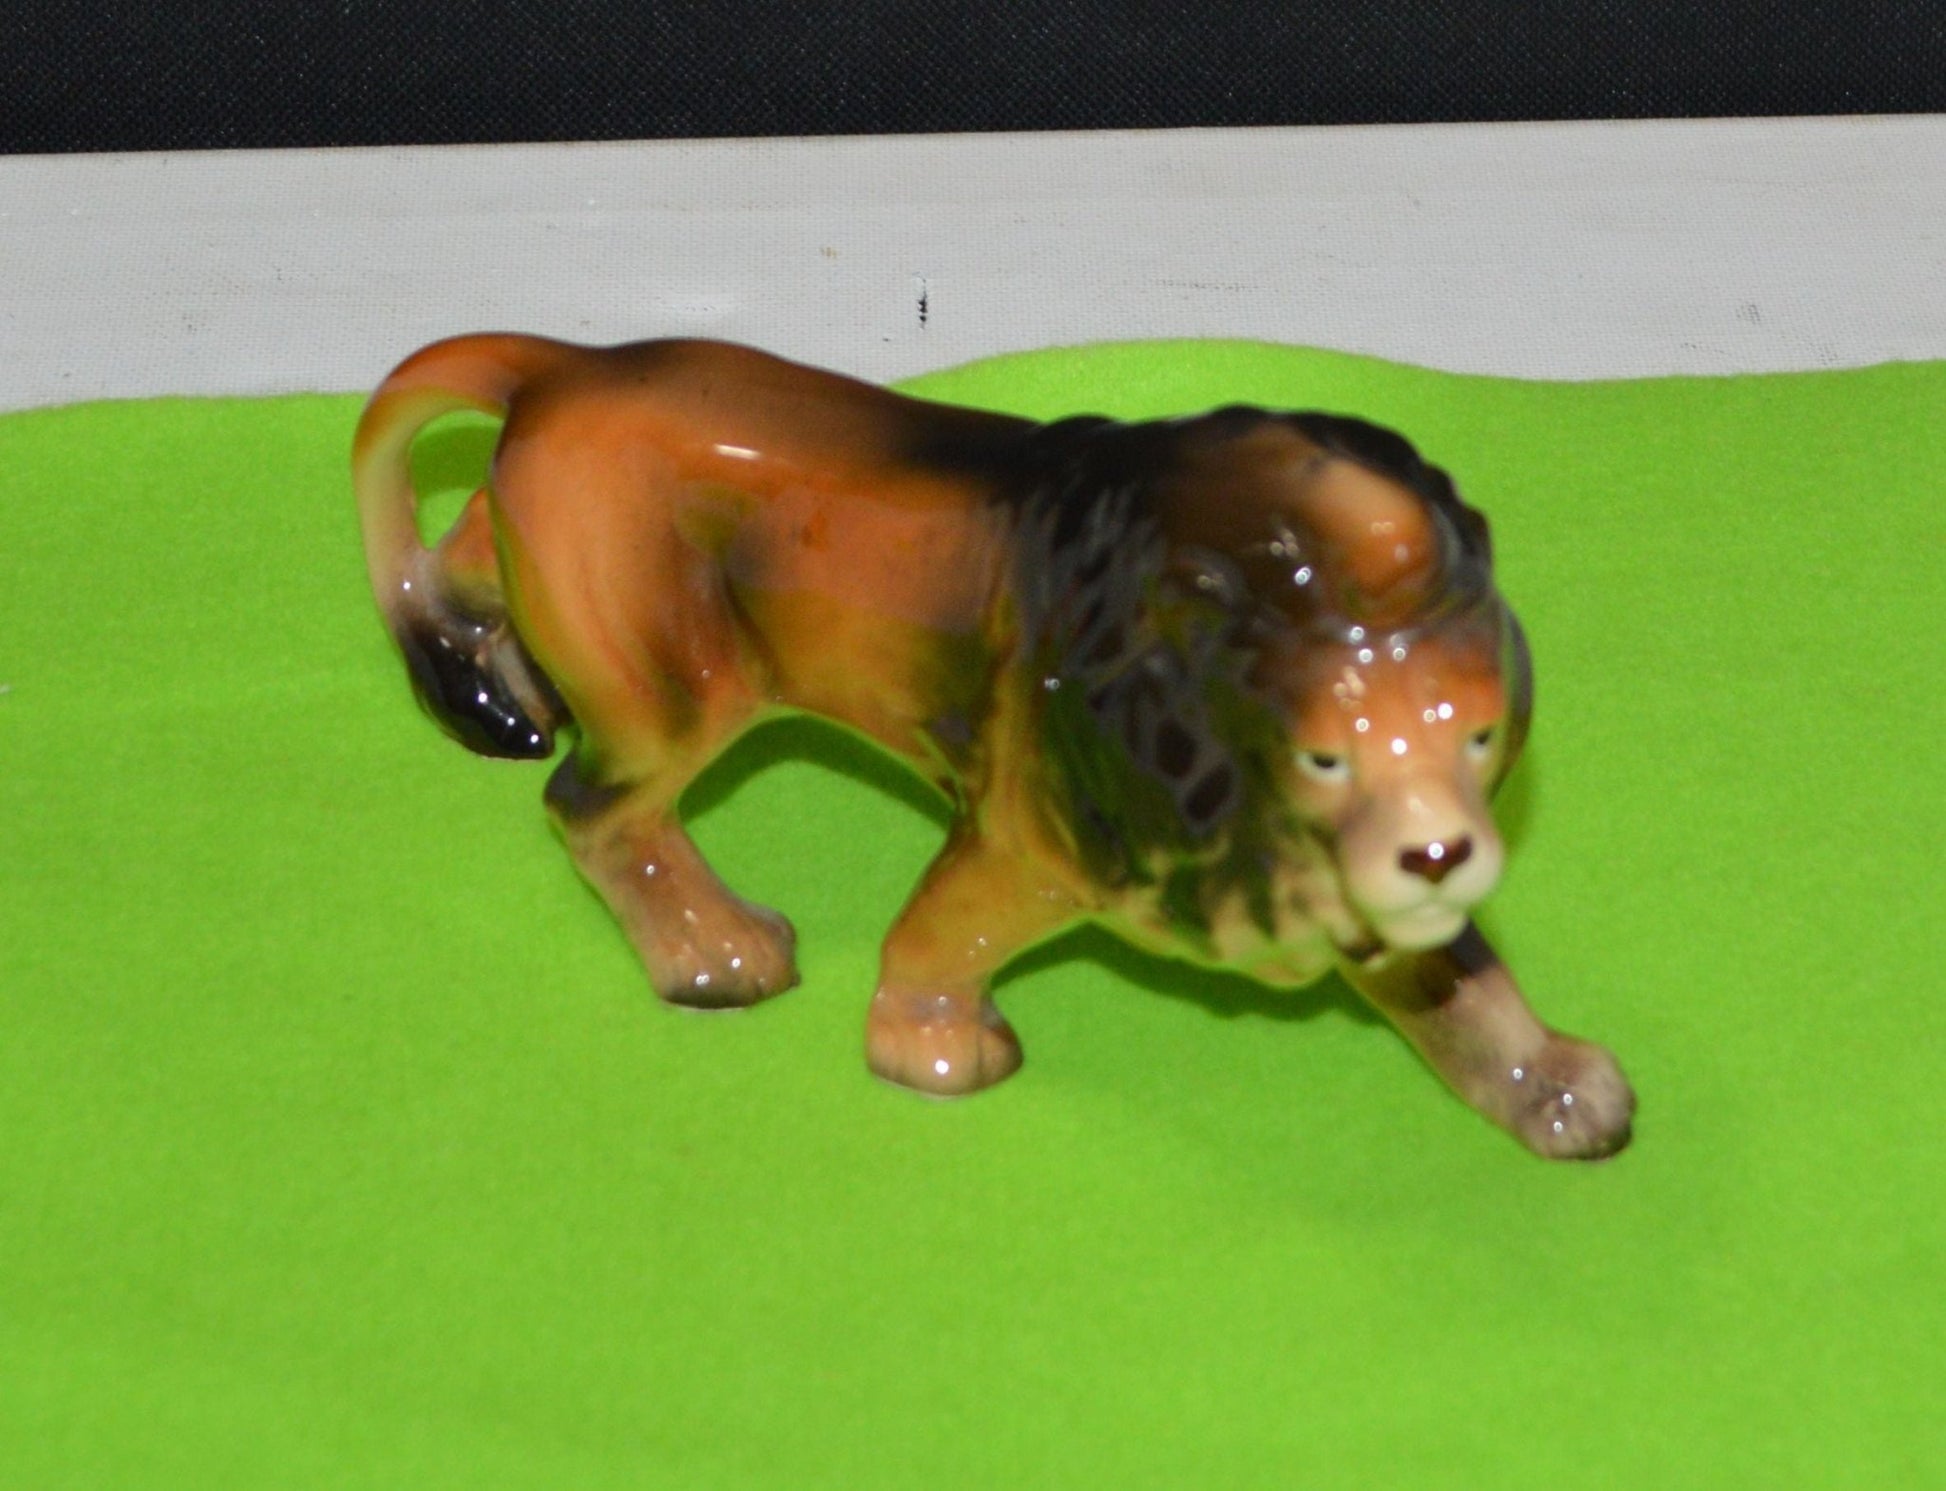 ANIMAL FIGURINE LION(PREVIOUSLY OWNED) GOOD CONDITION - TMD167207